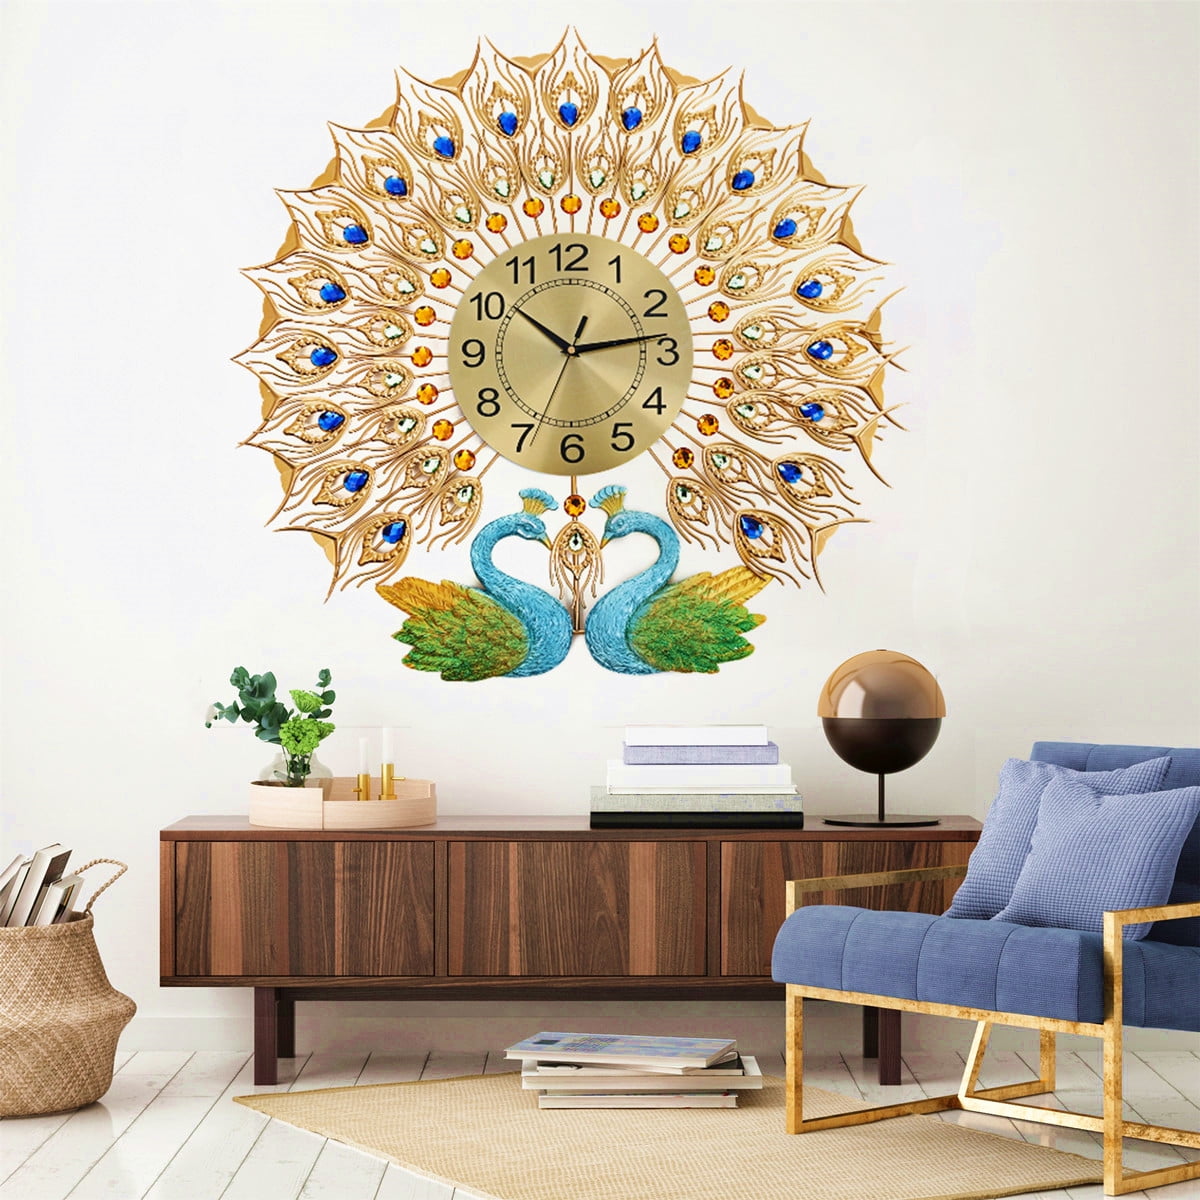 Combo Of Peacock Wooden Wall Clock & Wall Mounted Key Holder Wall Decoration 